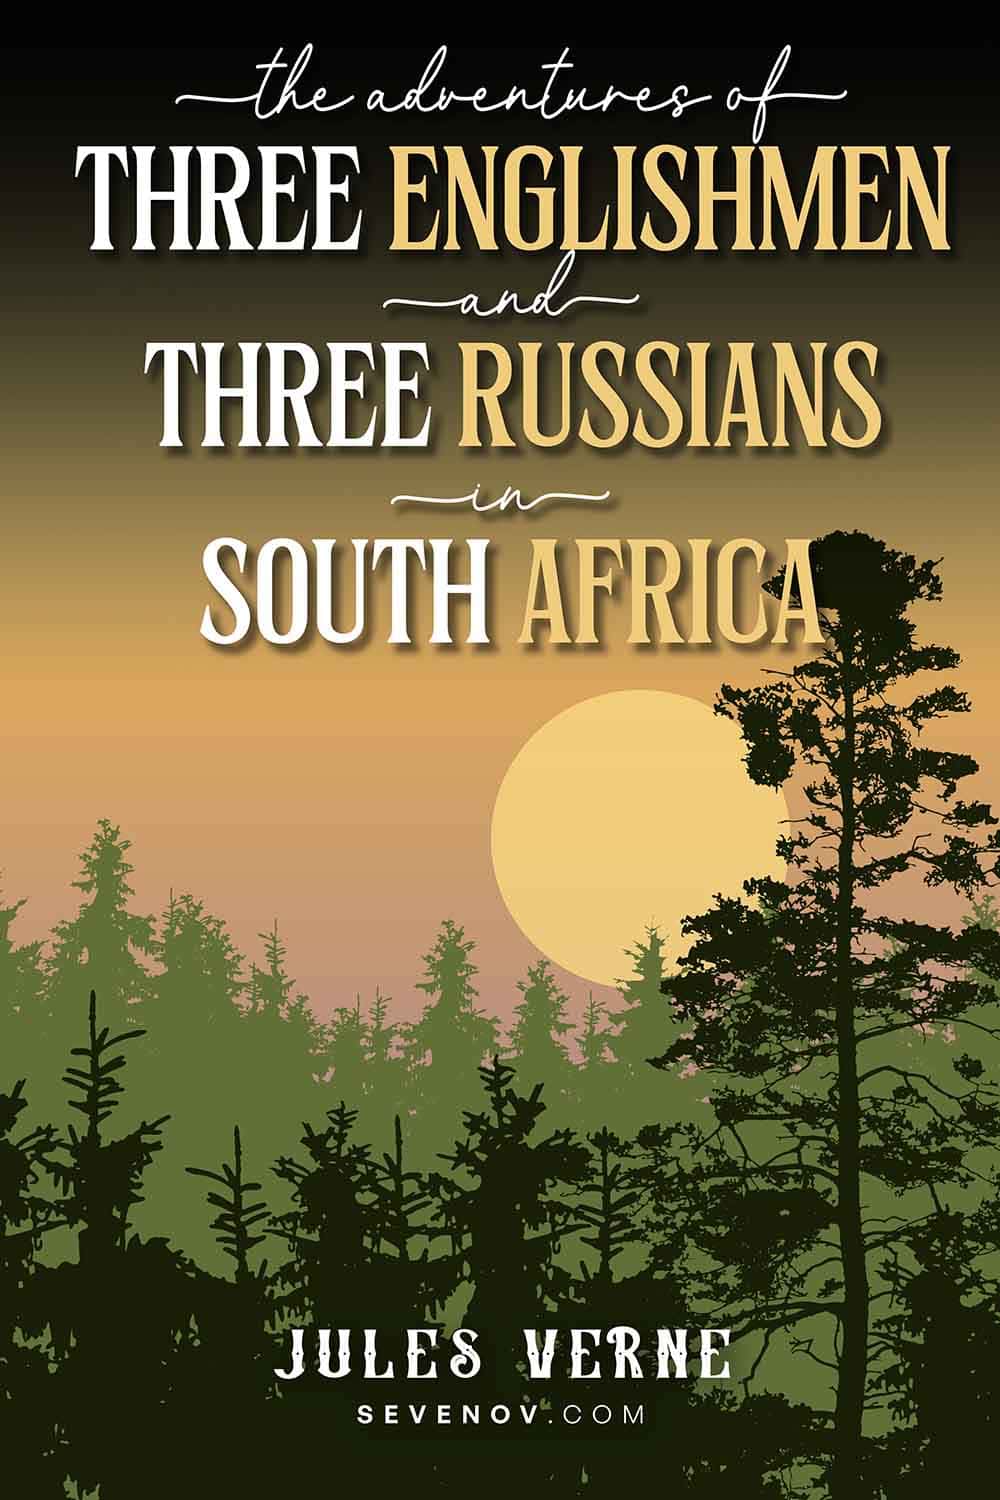 https://pagevio.com/wp-content/uploads/2023/02/the-adventures-of-three-englishmen-and-three-russians-in-south-africa-20221208.jpg